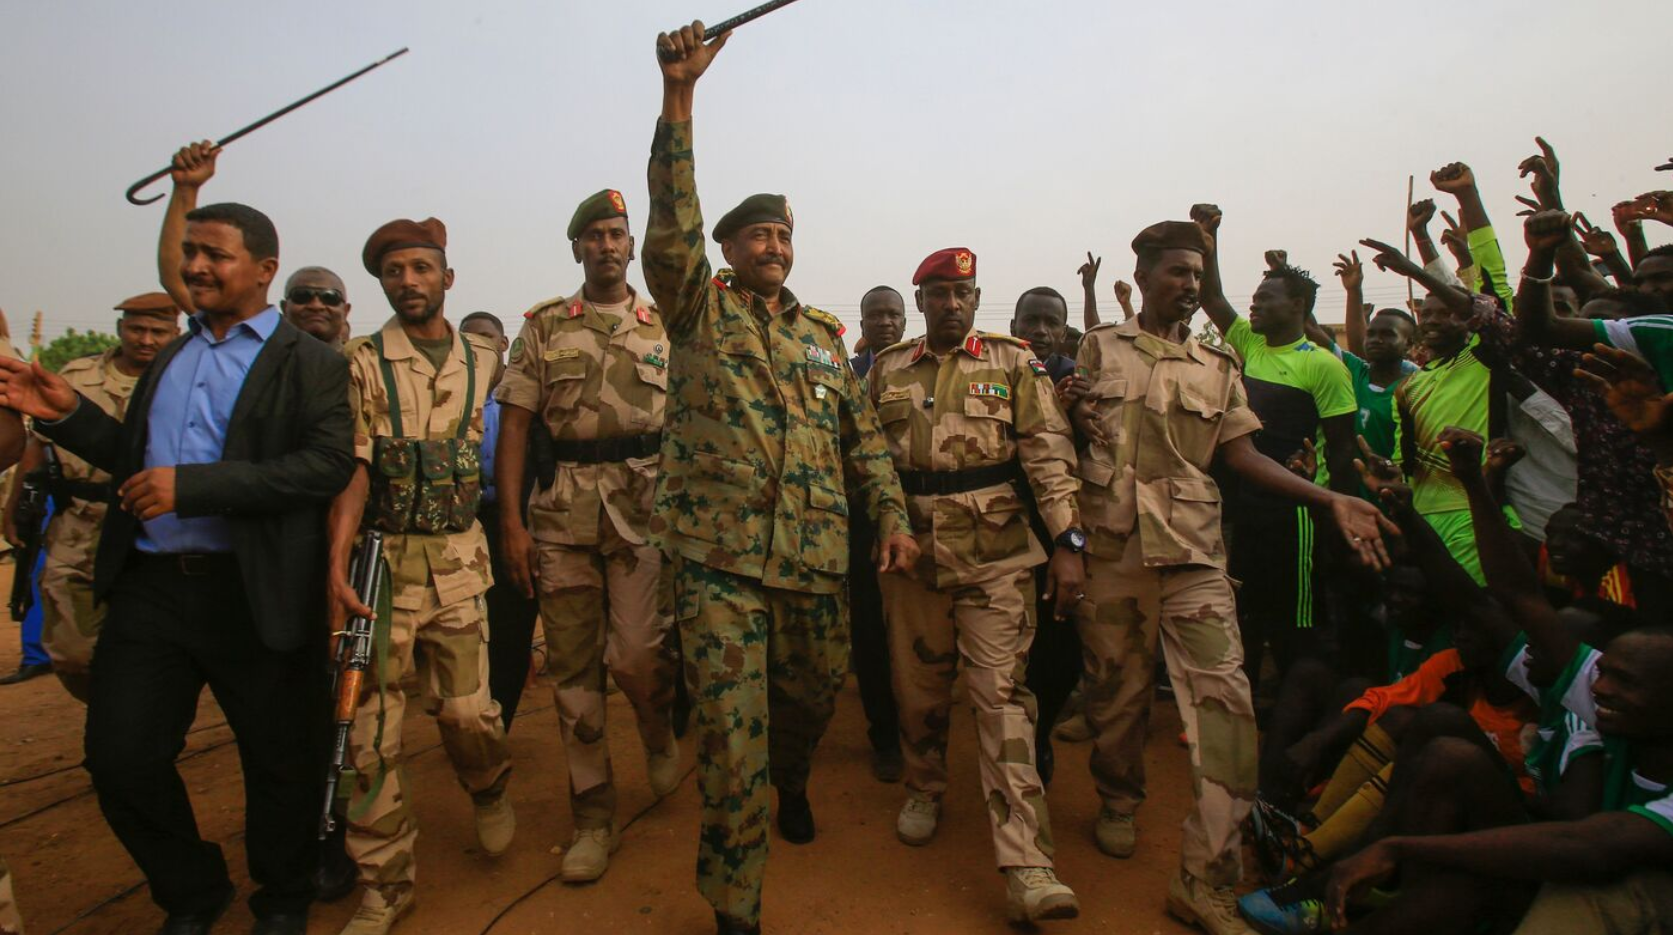 Sudan gears up for mass protest against generals